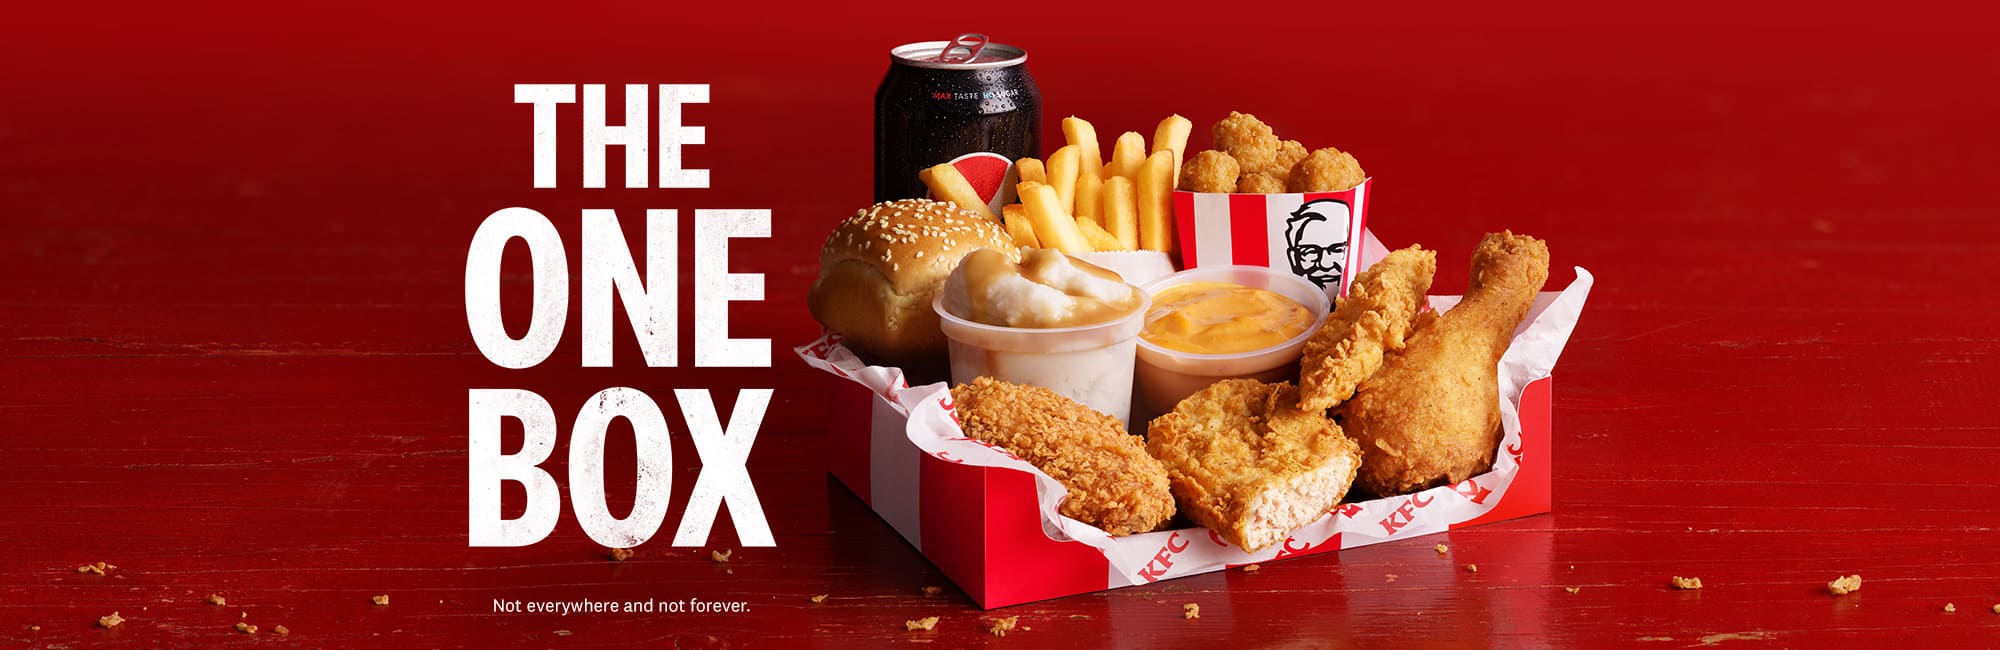 Order KFC The One Box for $13.95 for a limited time